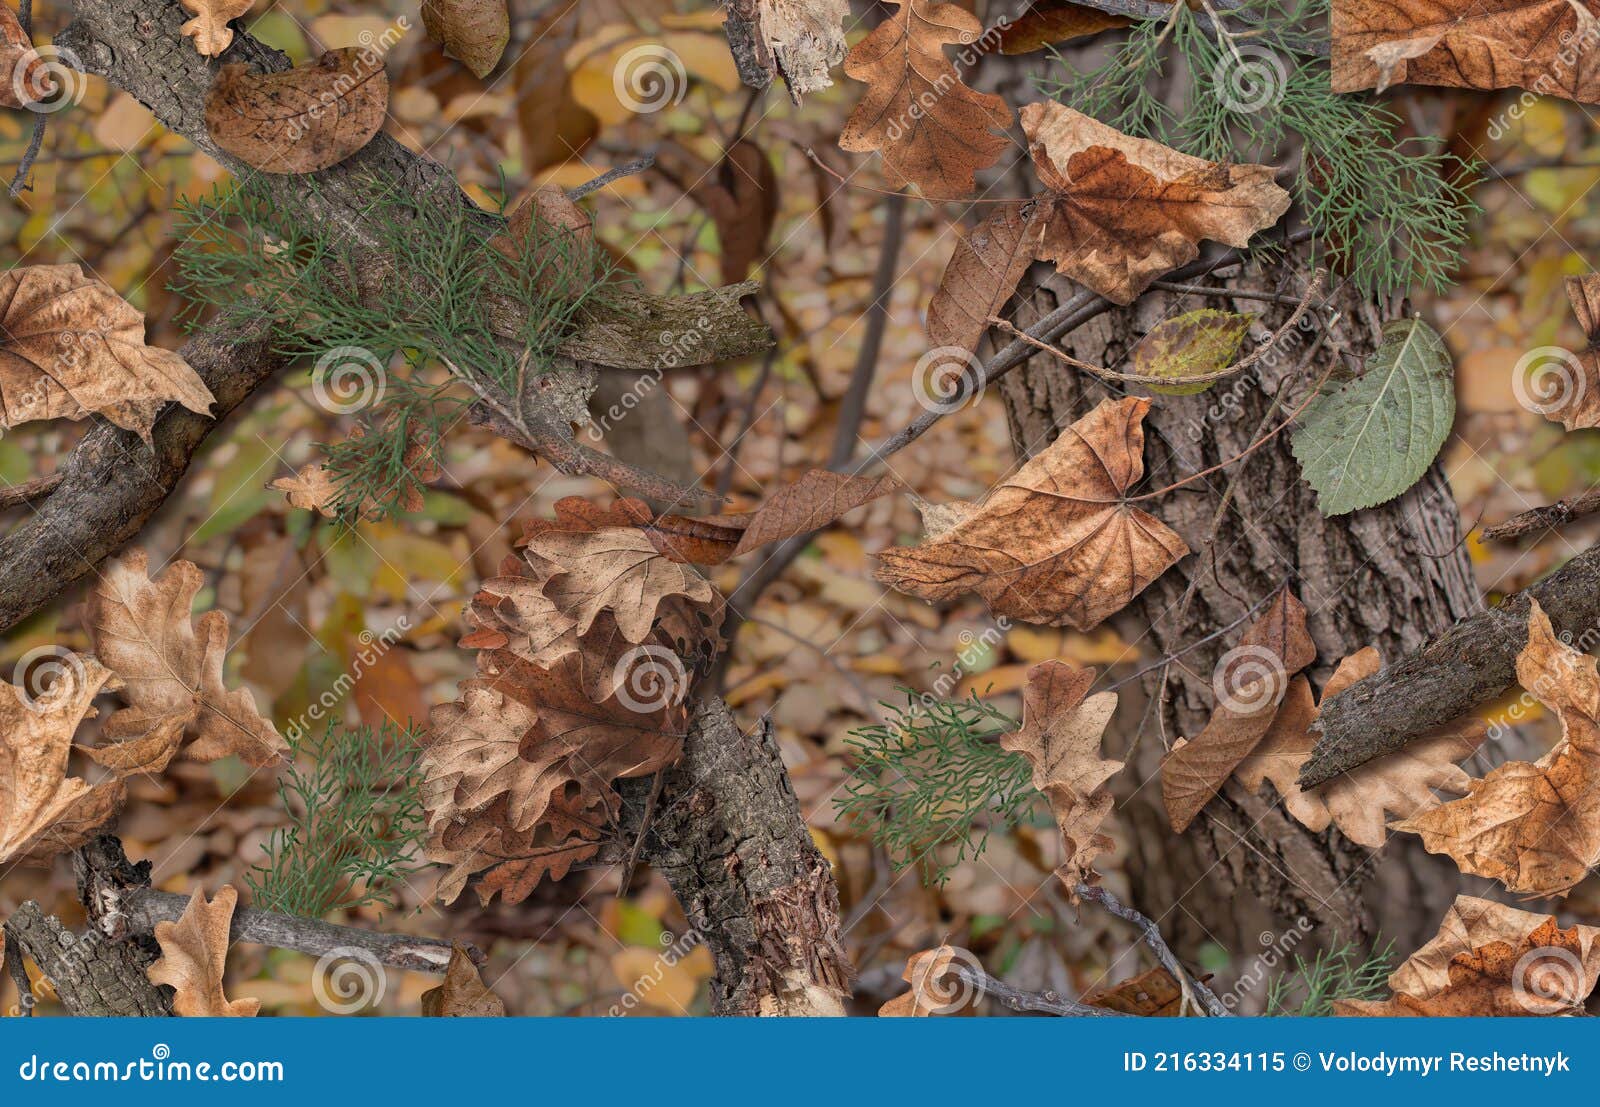 realistic camouflage seamless pattern. hunting camo for cloth, weapons or vechicles.